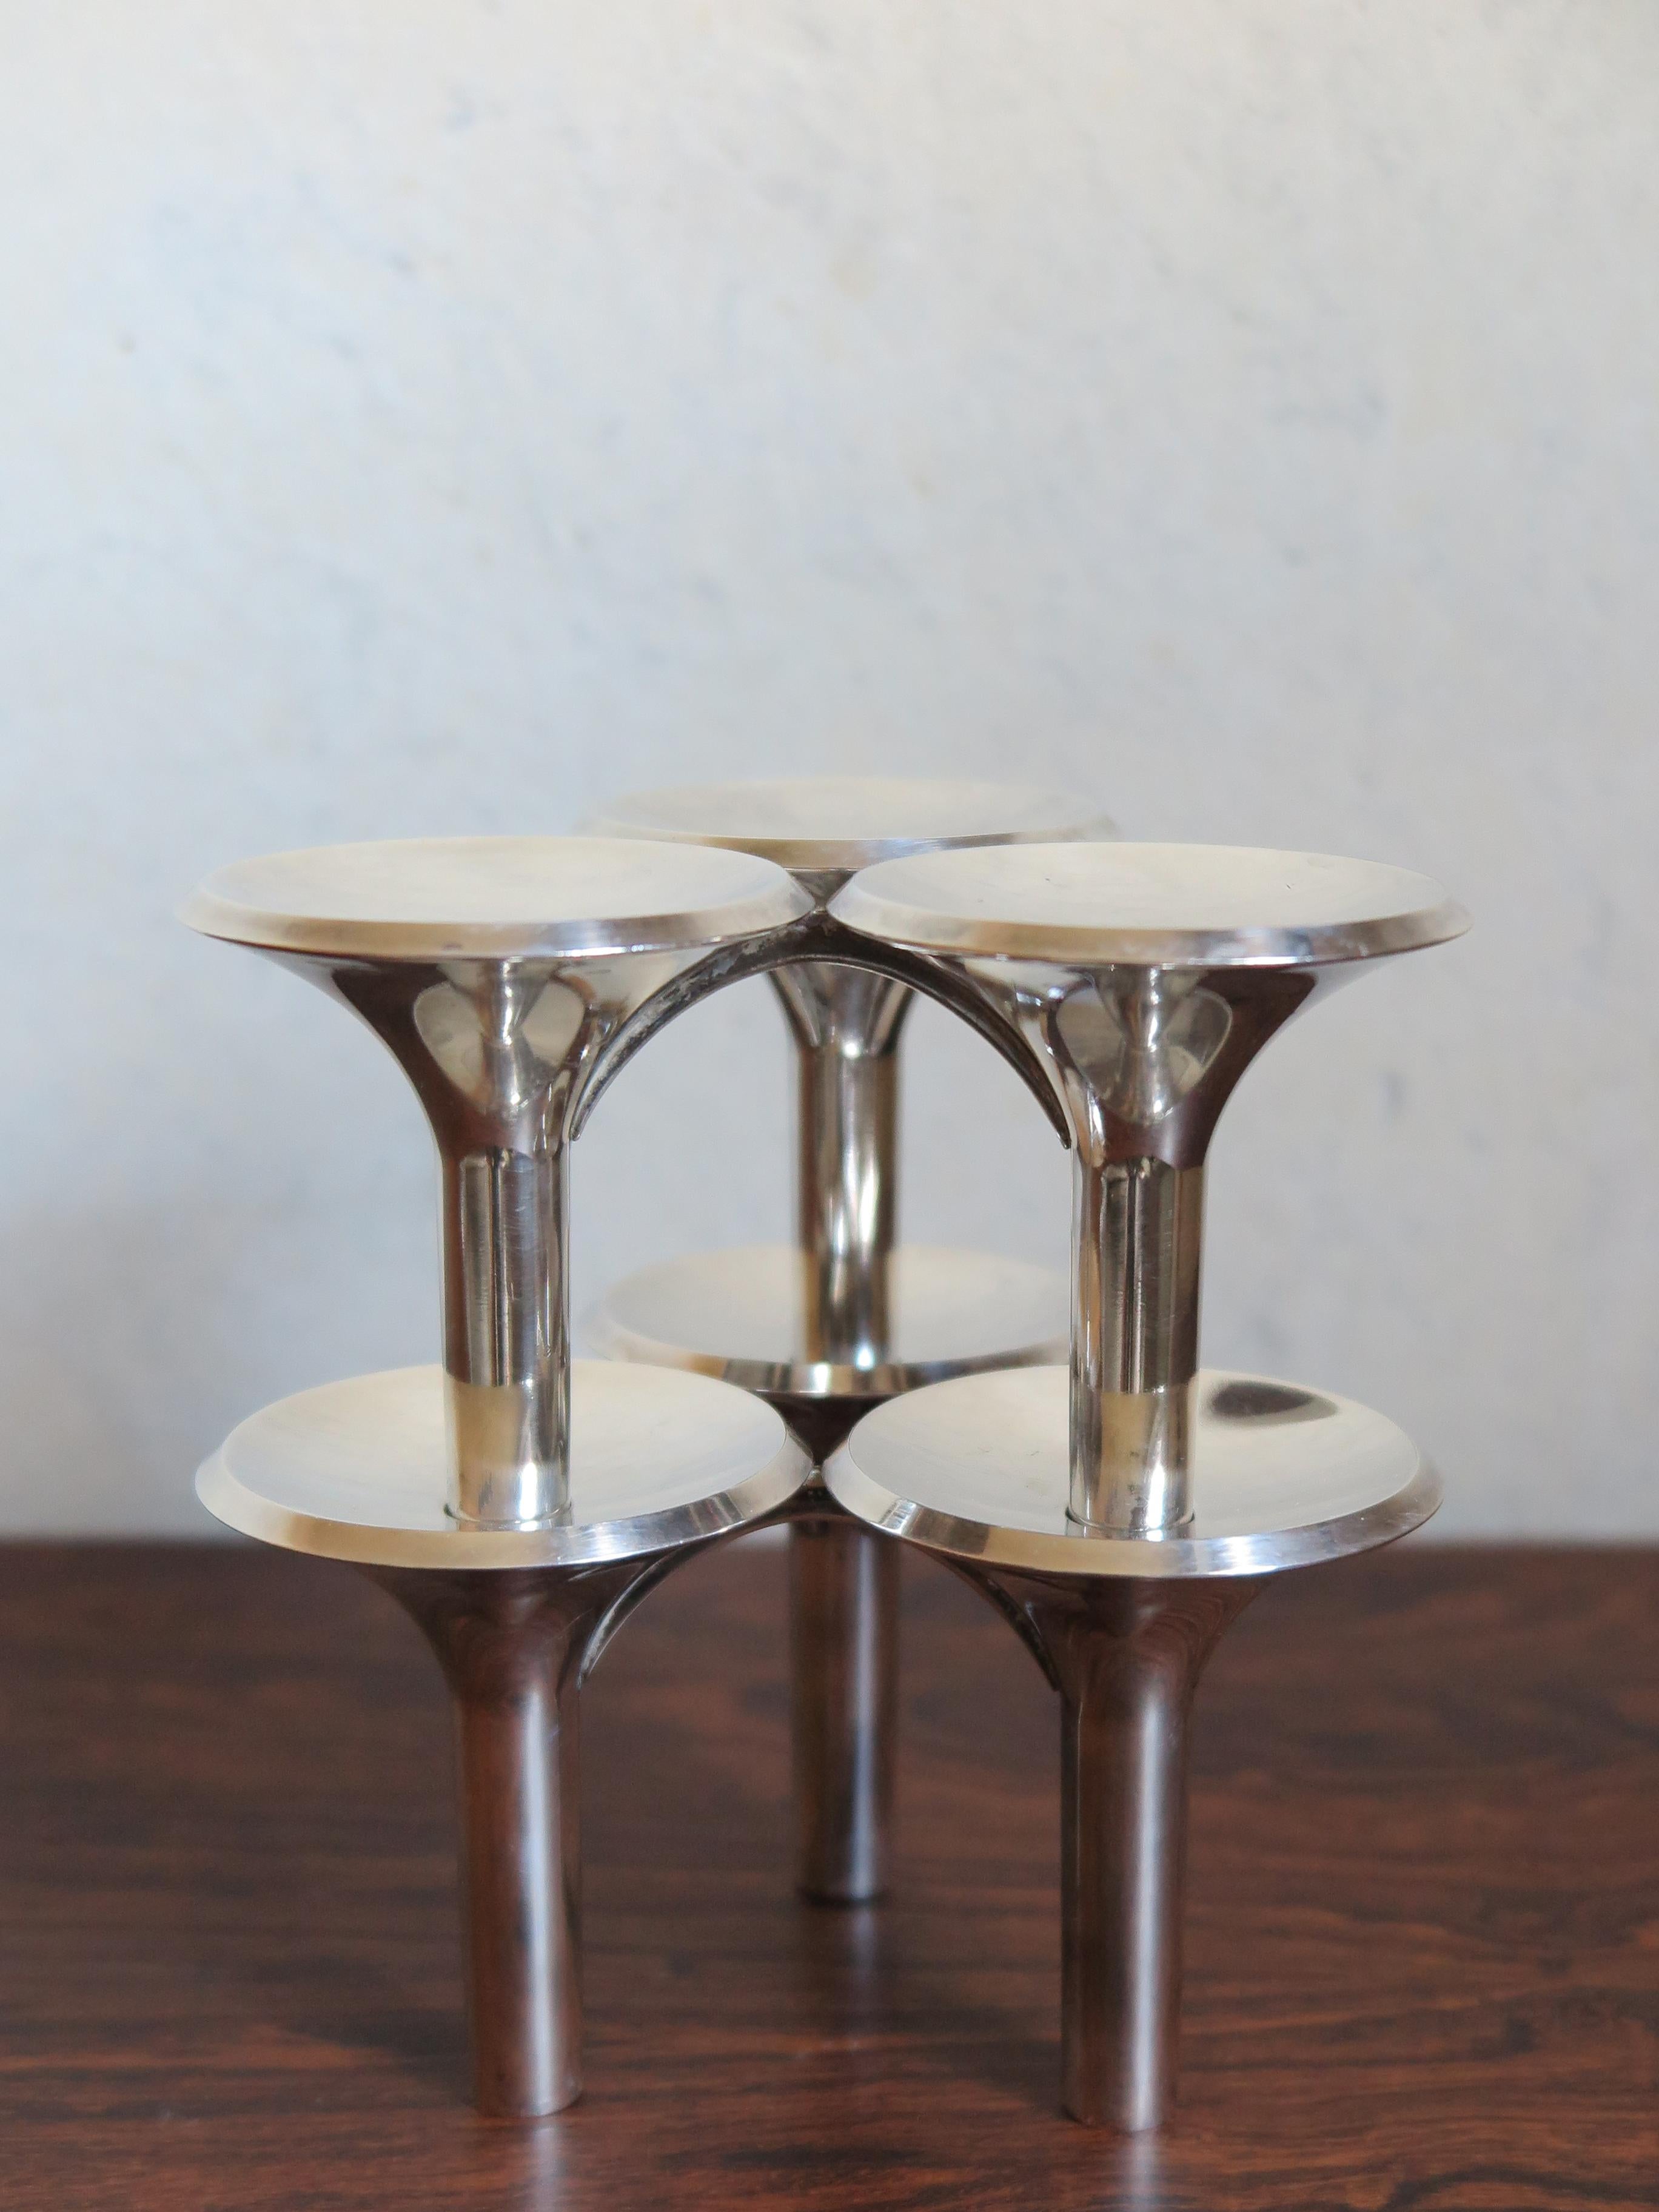 Ceasar Stoffi e Fritz Nagel Candleholders for BMF in Chromed Metal, 1960s For Sale 2